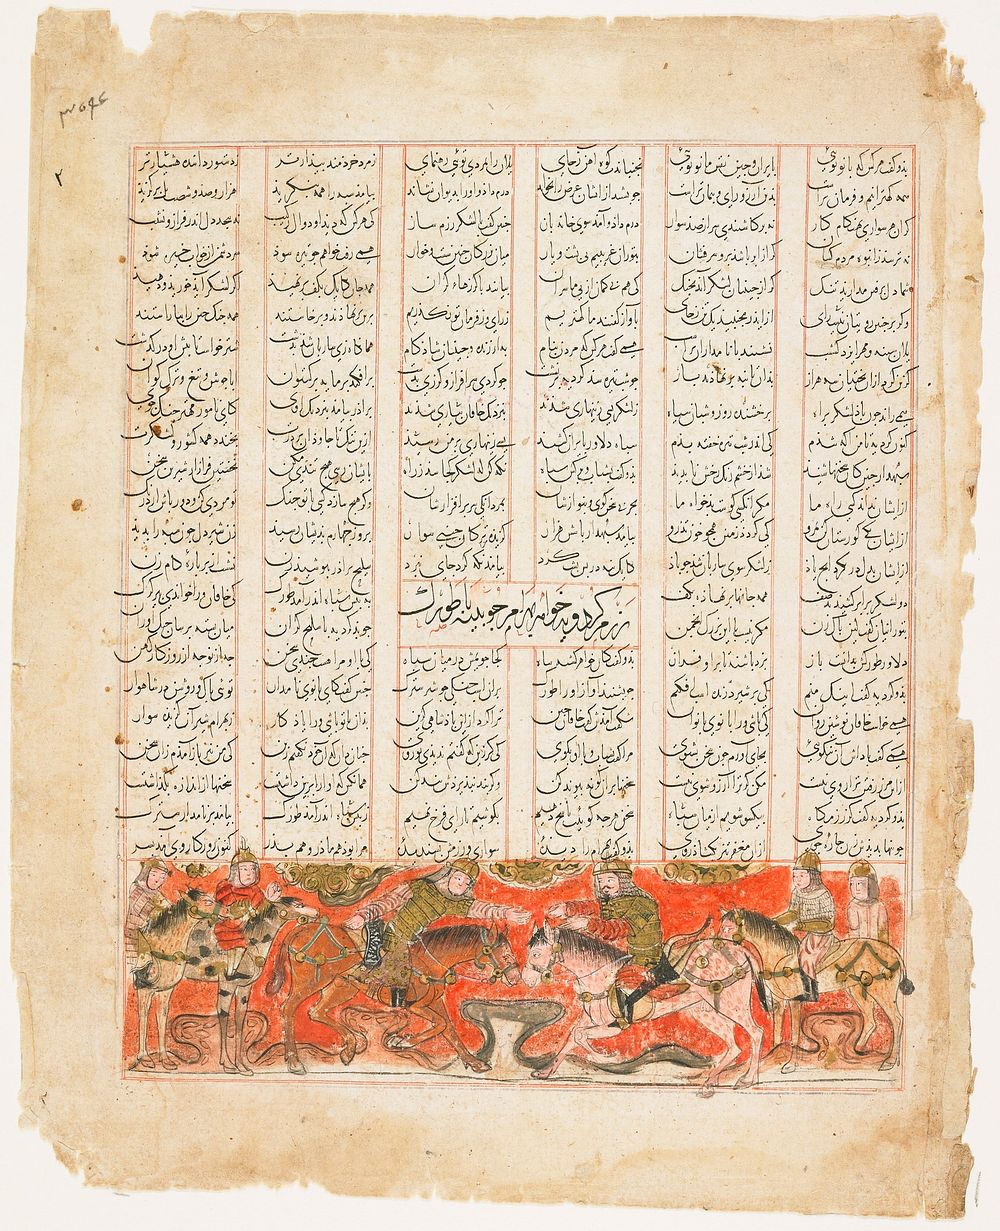 scene from a Shah Namah MS by Firdausi, probably painted in Shiraz of Isfahan; the Khagan sends his brother Tuwurg to pursue…